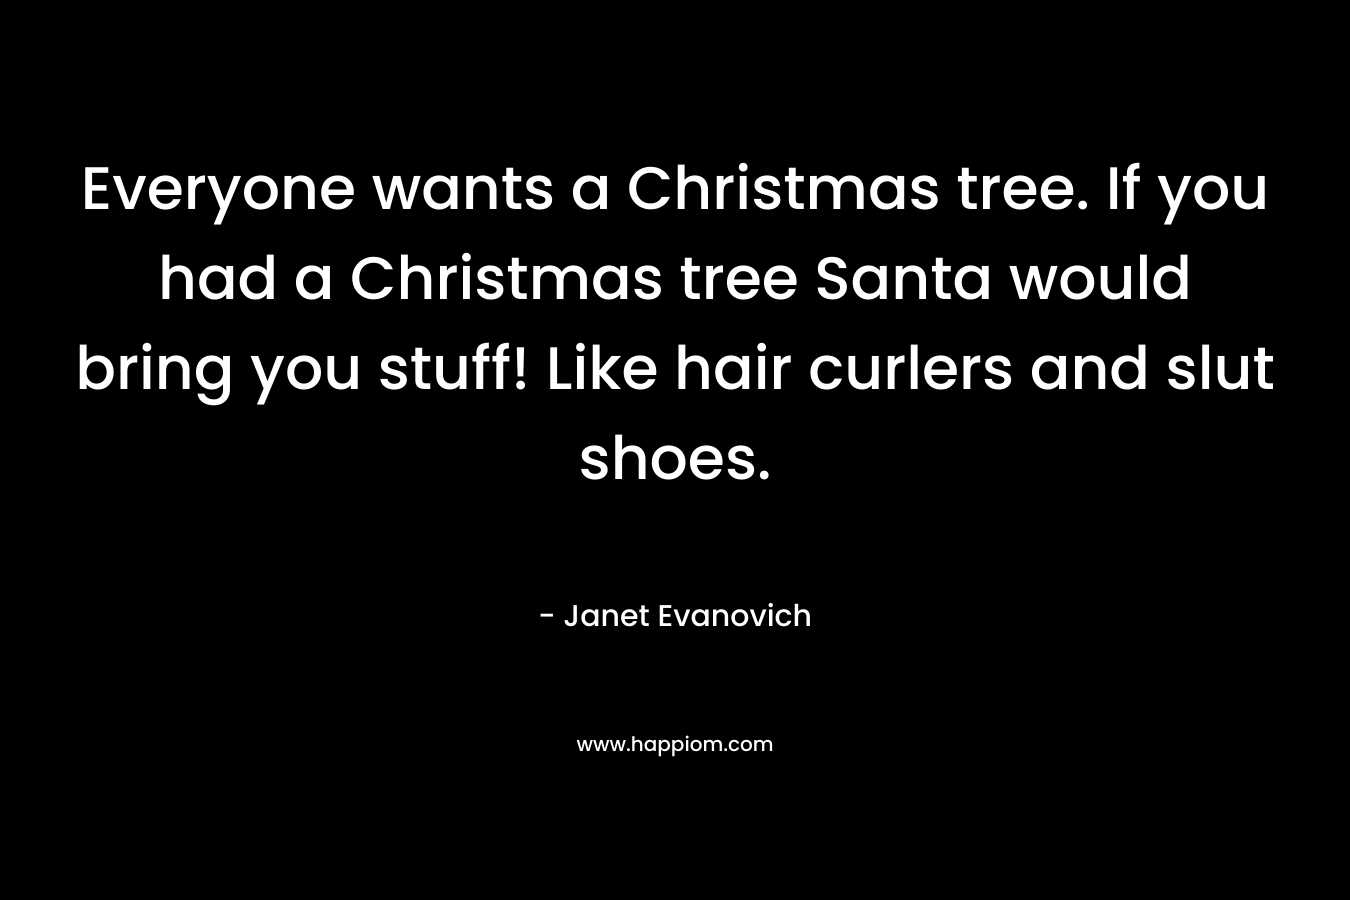 Everyone wants a Christmas tree. If you had a Christmas tree Santa would bring you stuff! Like hair curlers and slut shoes. – Janet Evanovich